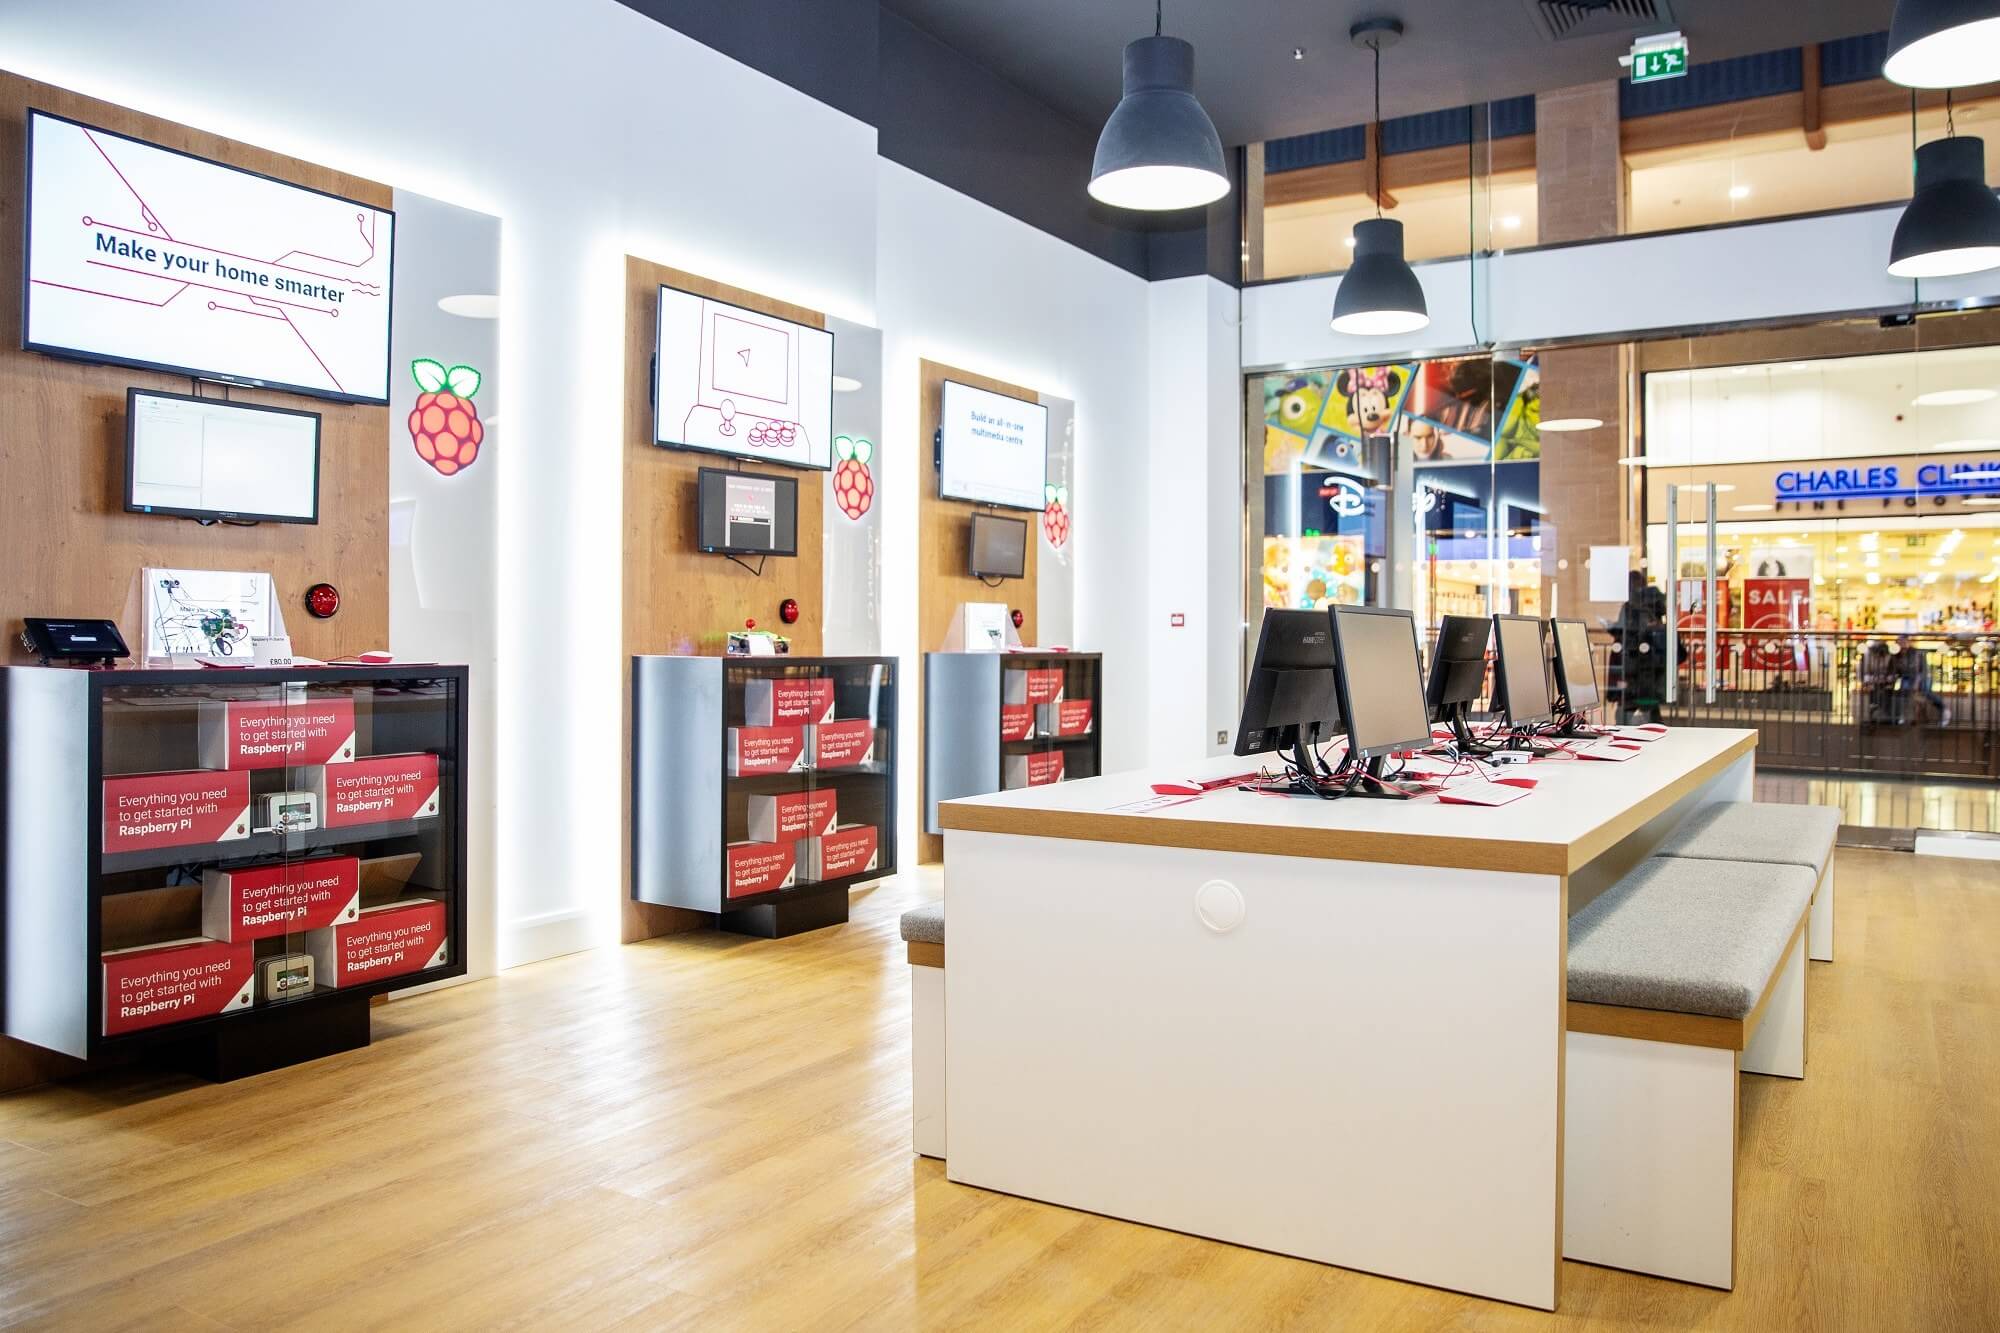 Raspberry Pi opens its first brick-and-mortar store